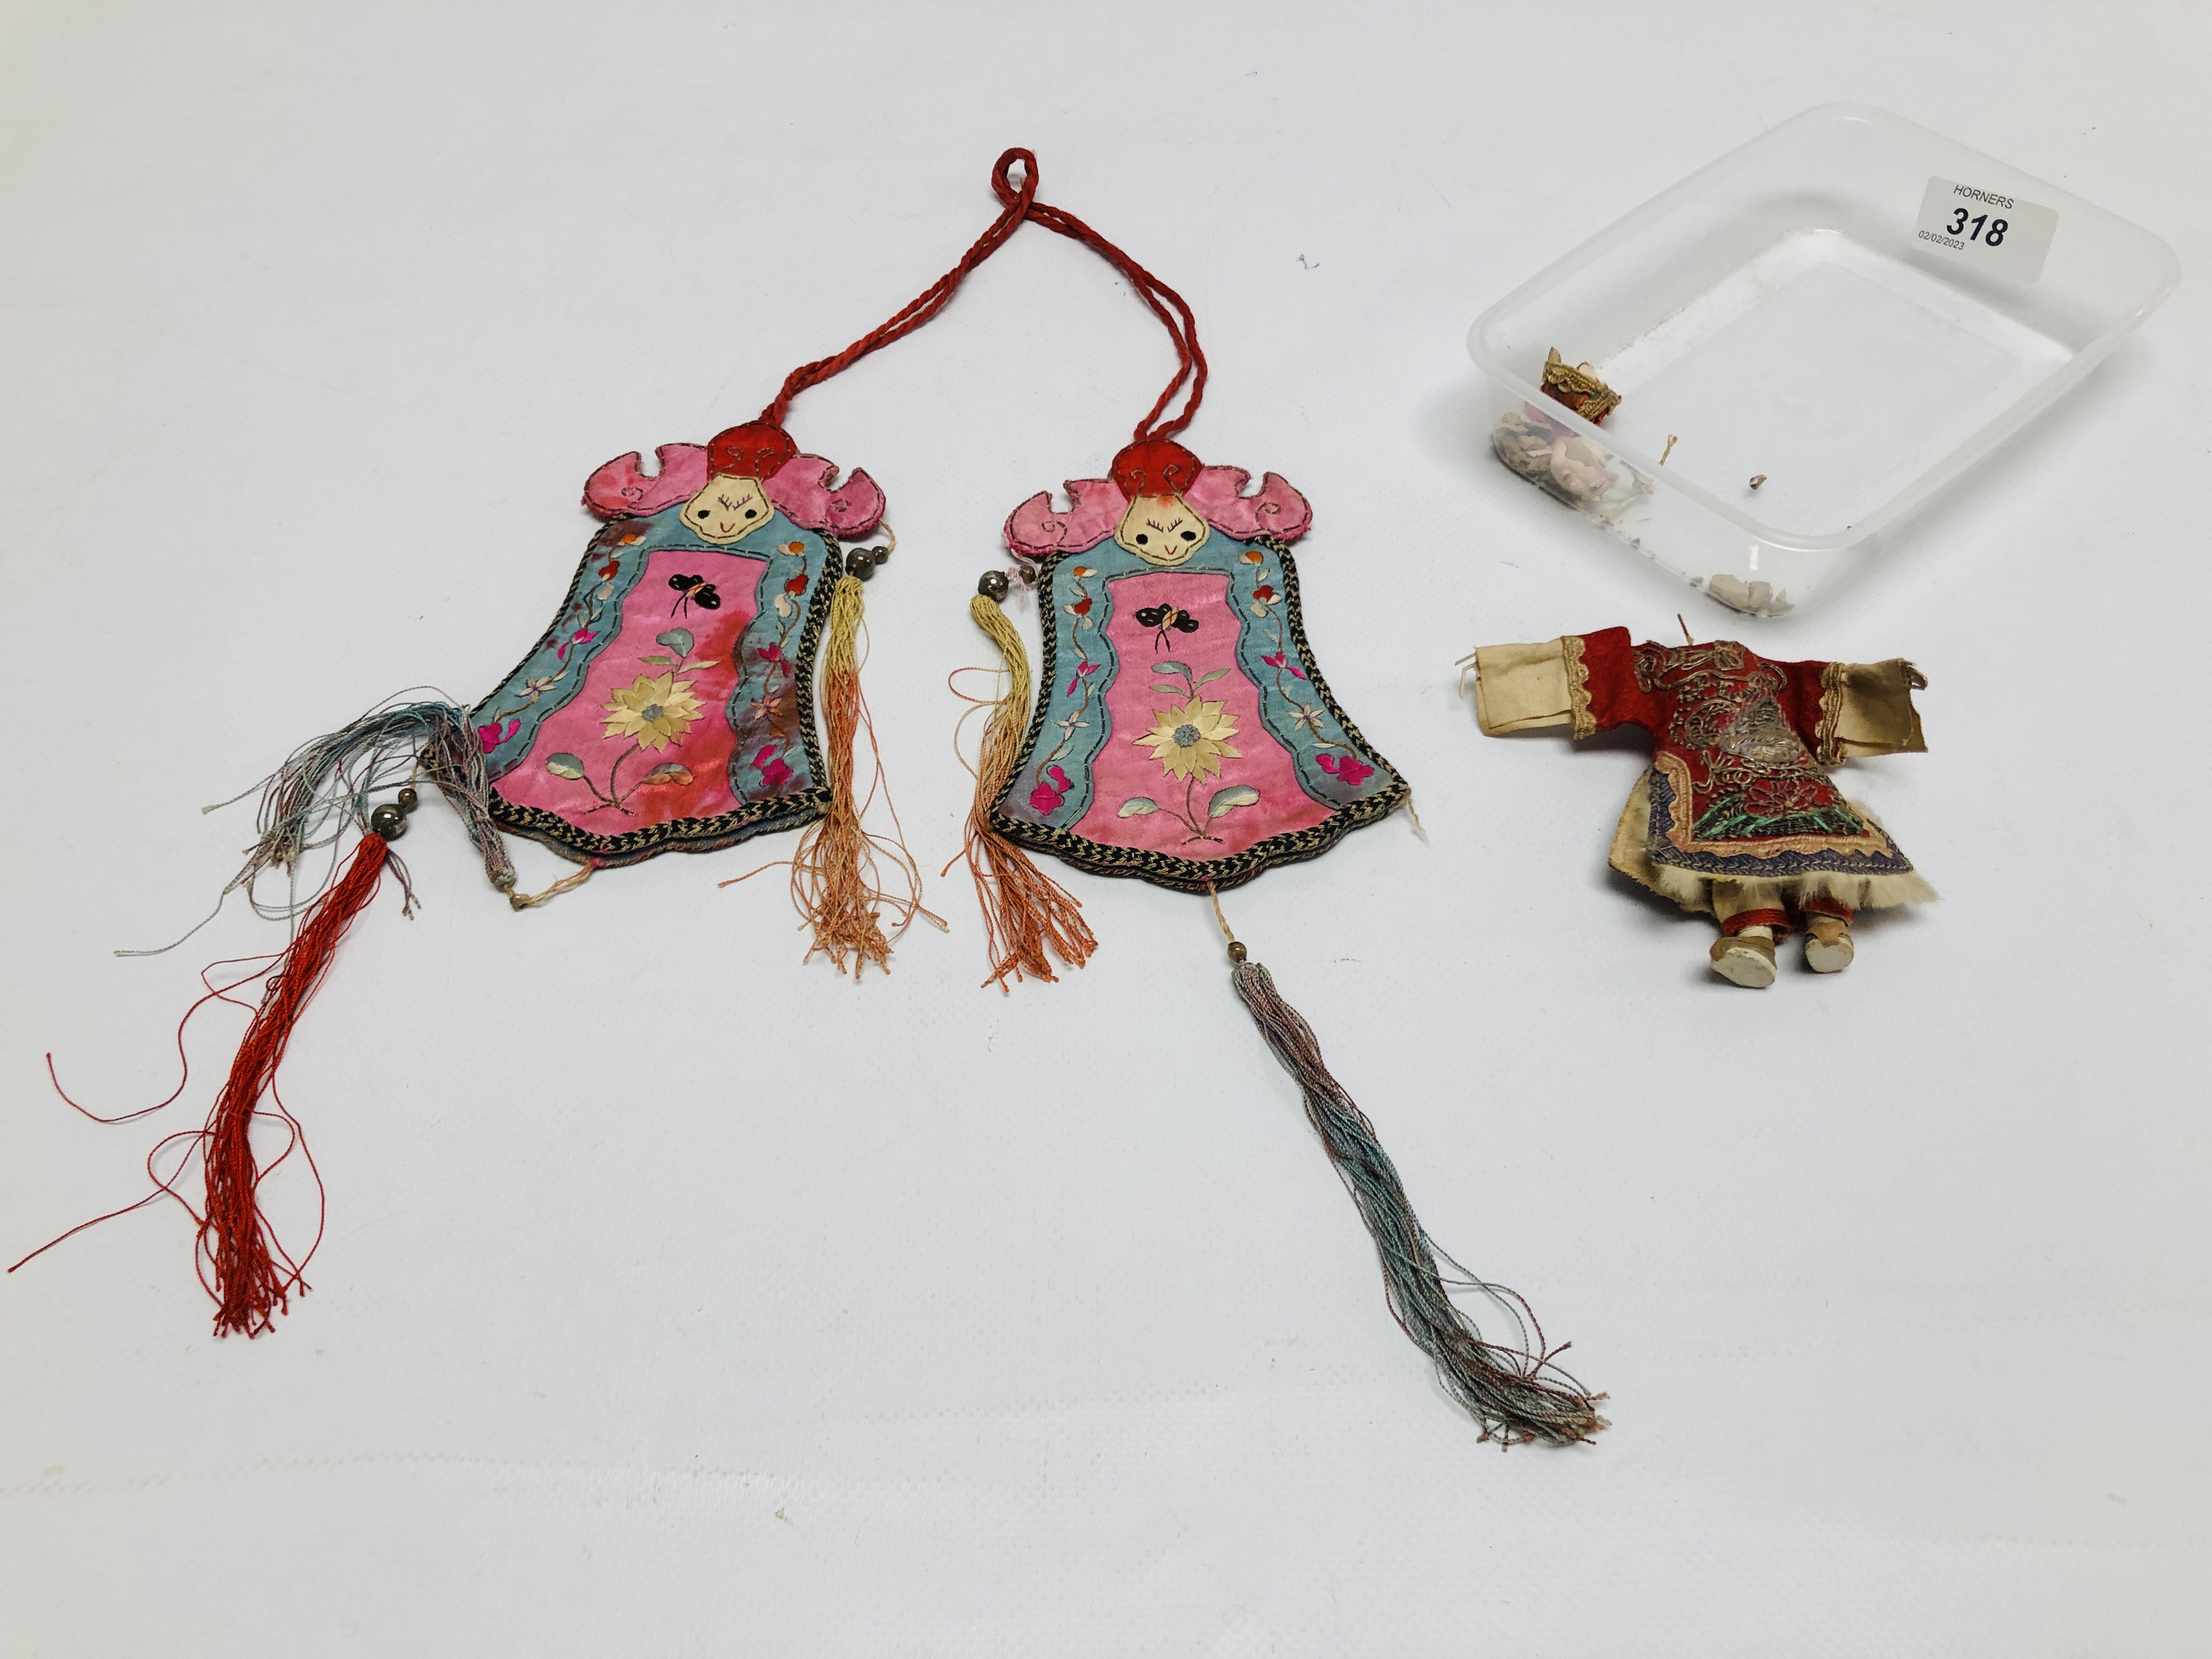 AN ORIENTAL VINTAGE SILK EMBRIODERED HANGING ALONG WITH A MINIATURE HANDMADE DOLL A/F